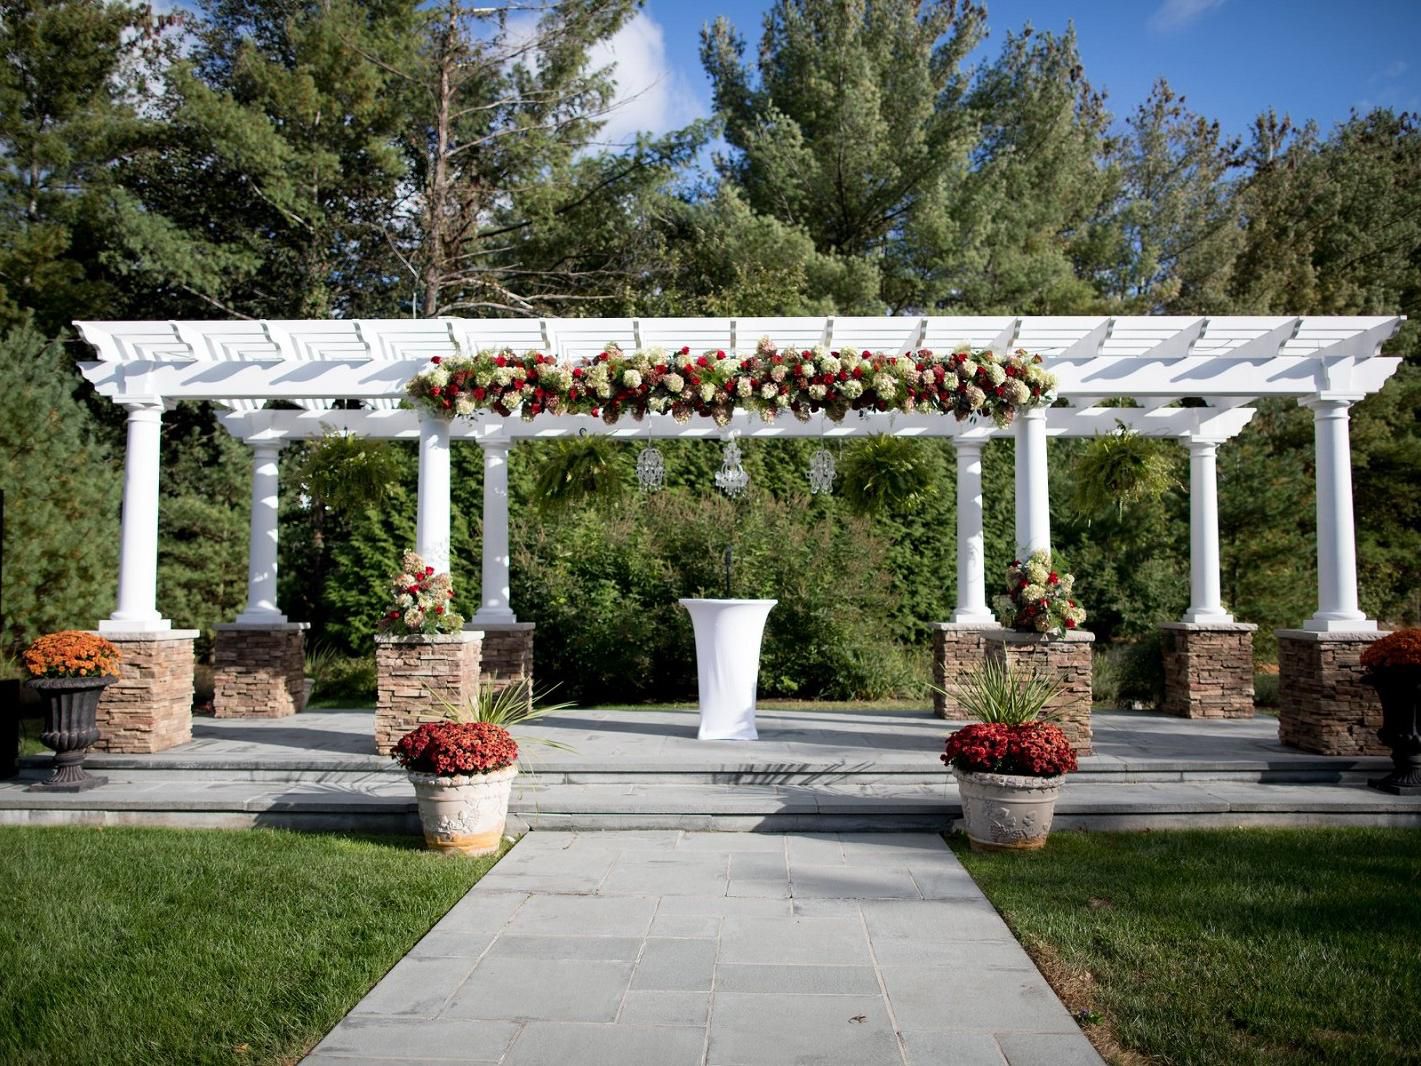 Your one-stop-shop for weddings and special events. Beautiful outdoor ceremony space, unique waterfalls garden reception, and delicious food. All in one location, we create and you celebrate.  